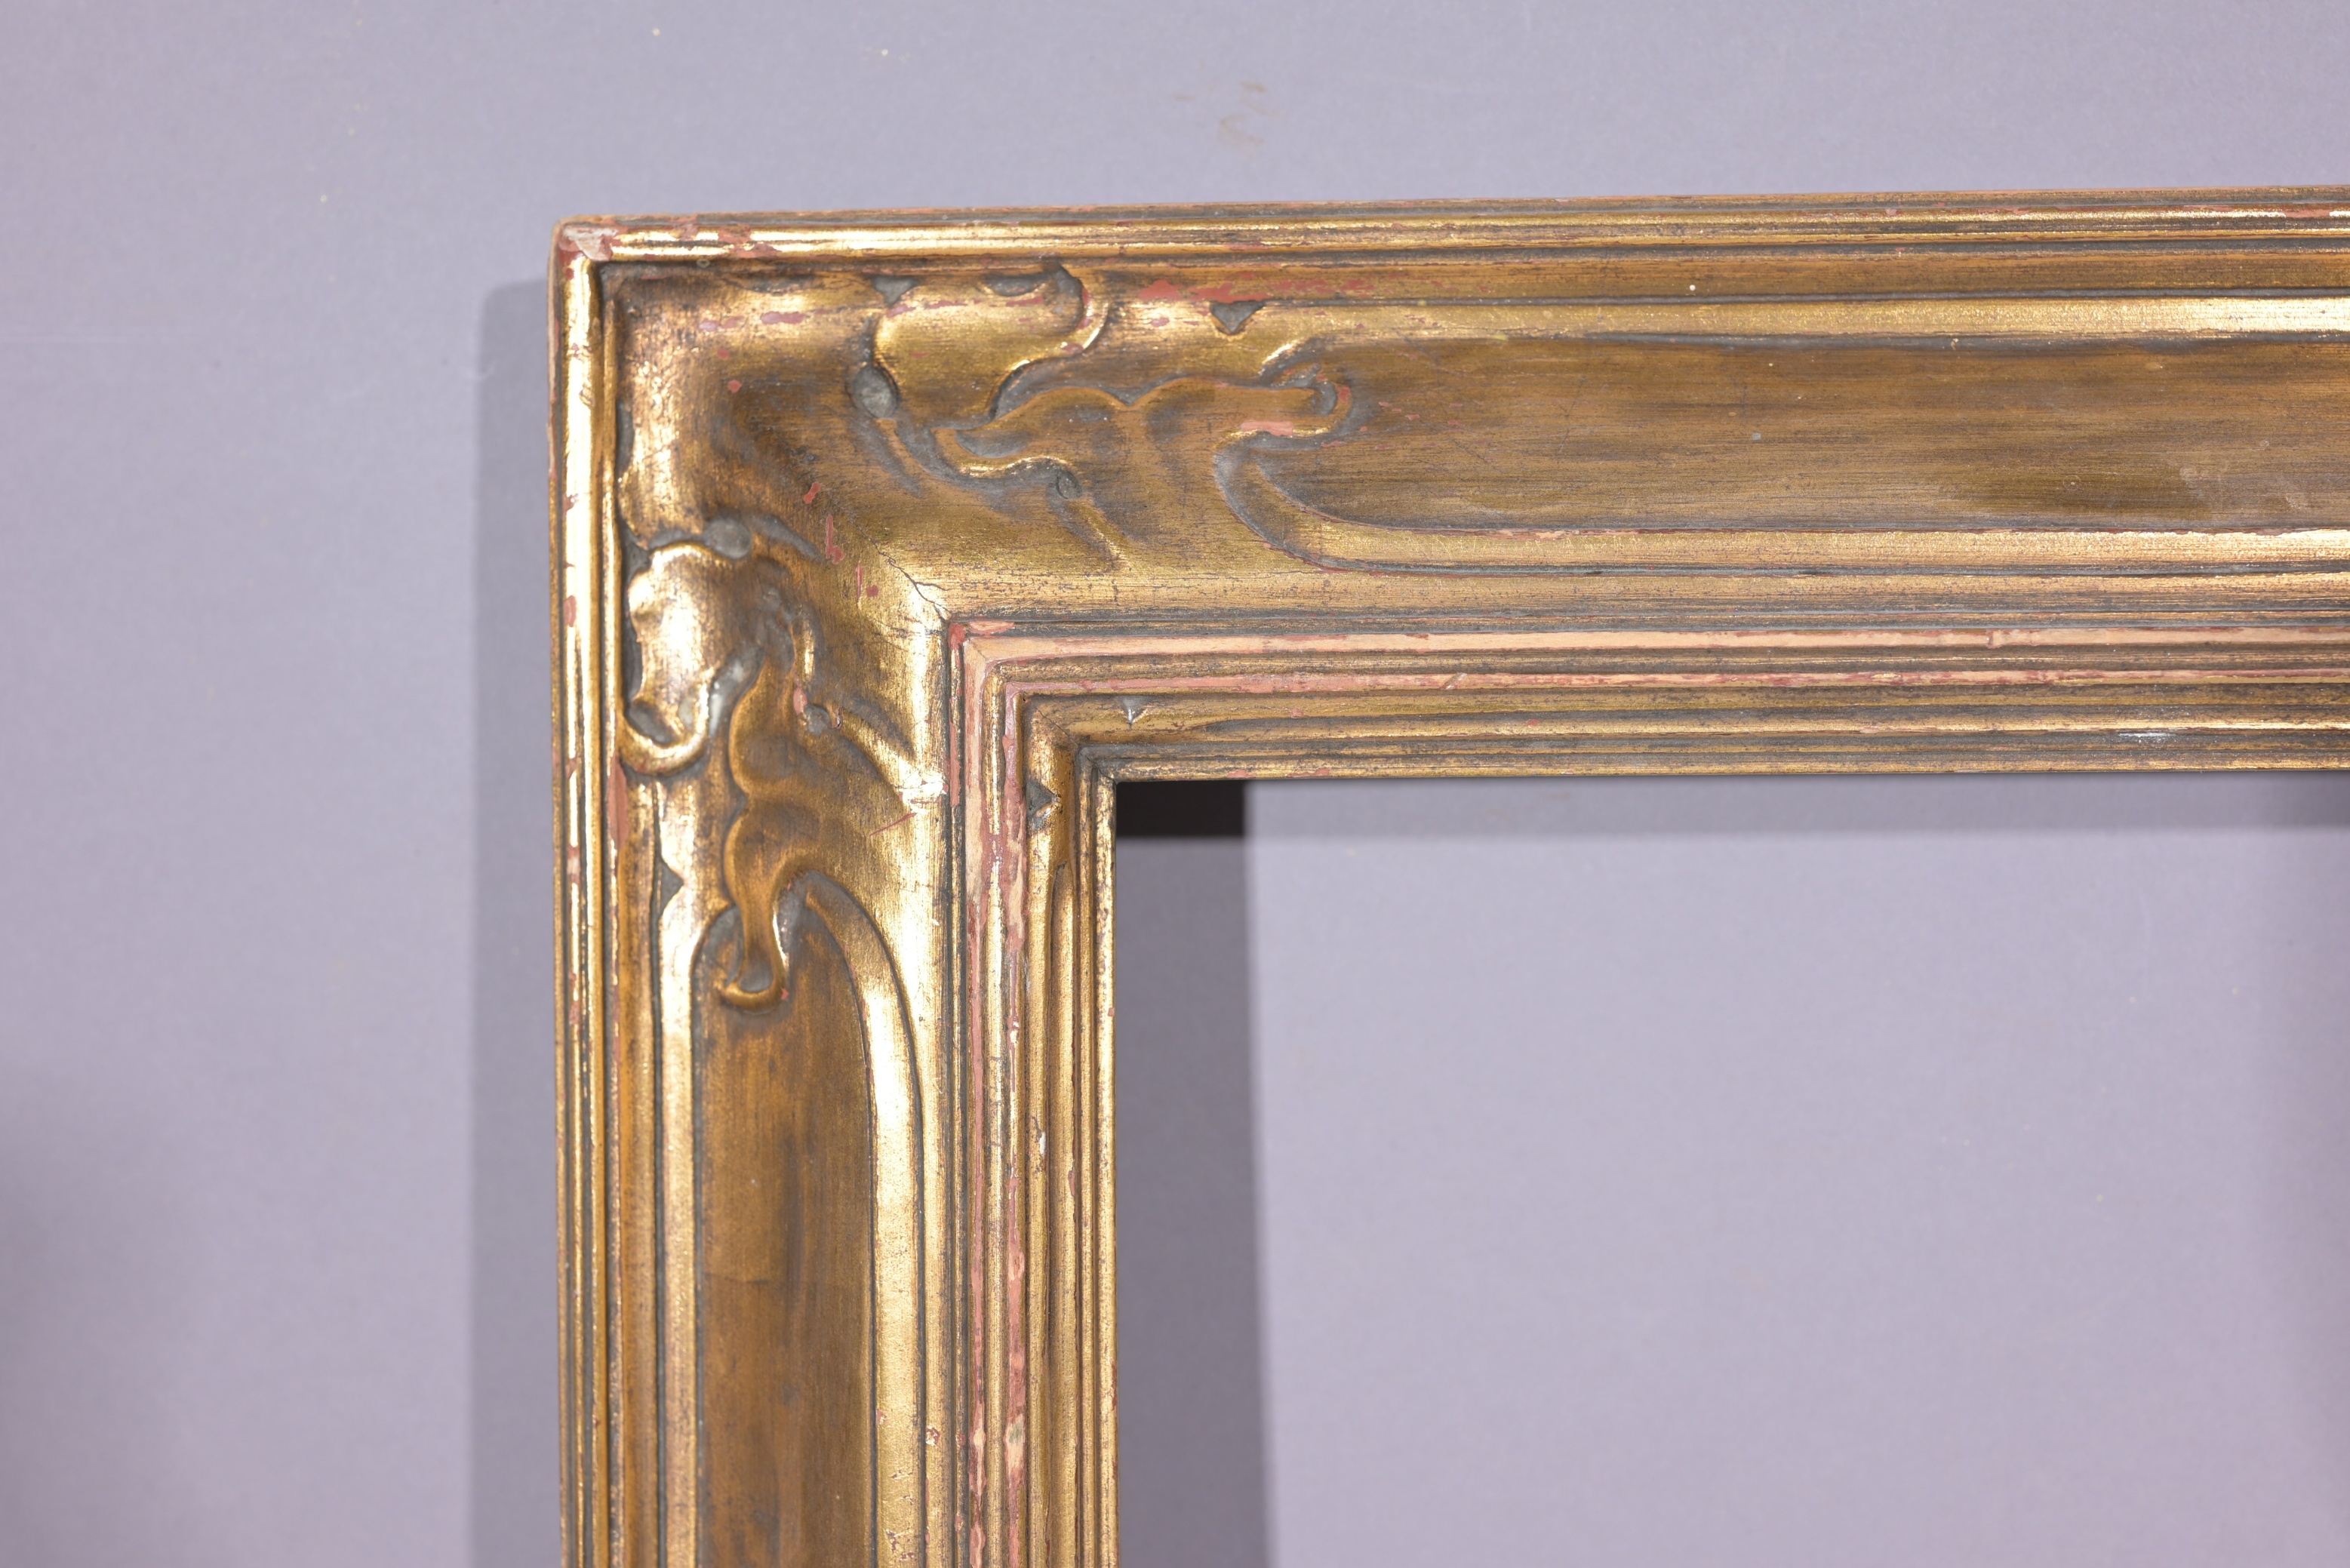 Exhibited 1910 Newcomb Macklin Frame- 21 x 17 - Image 3 of 11